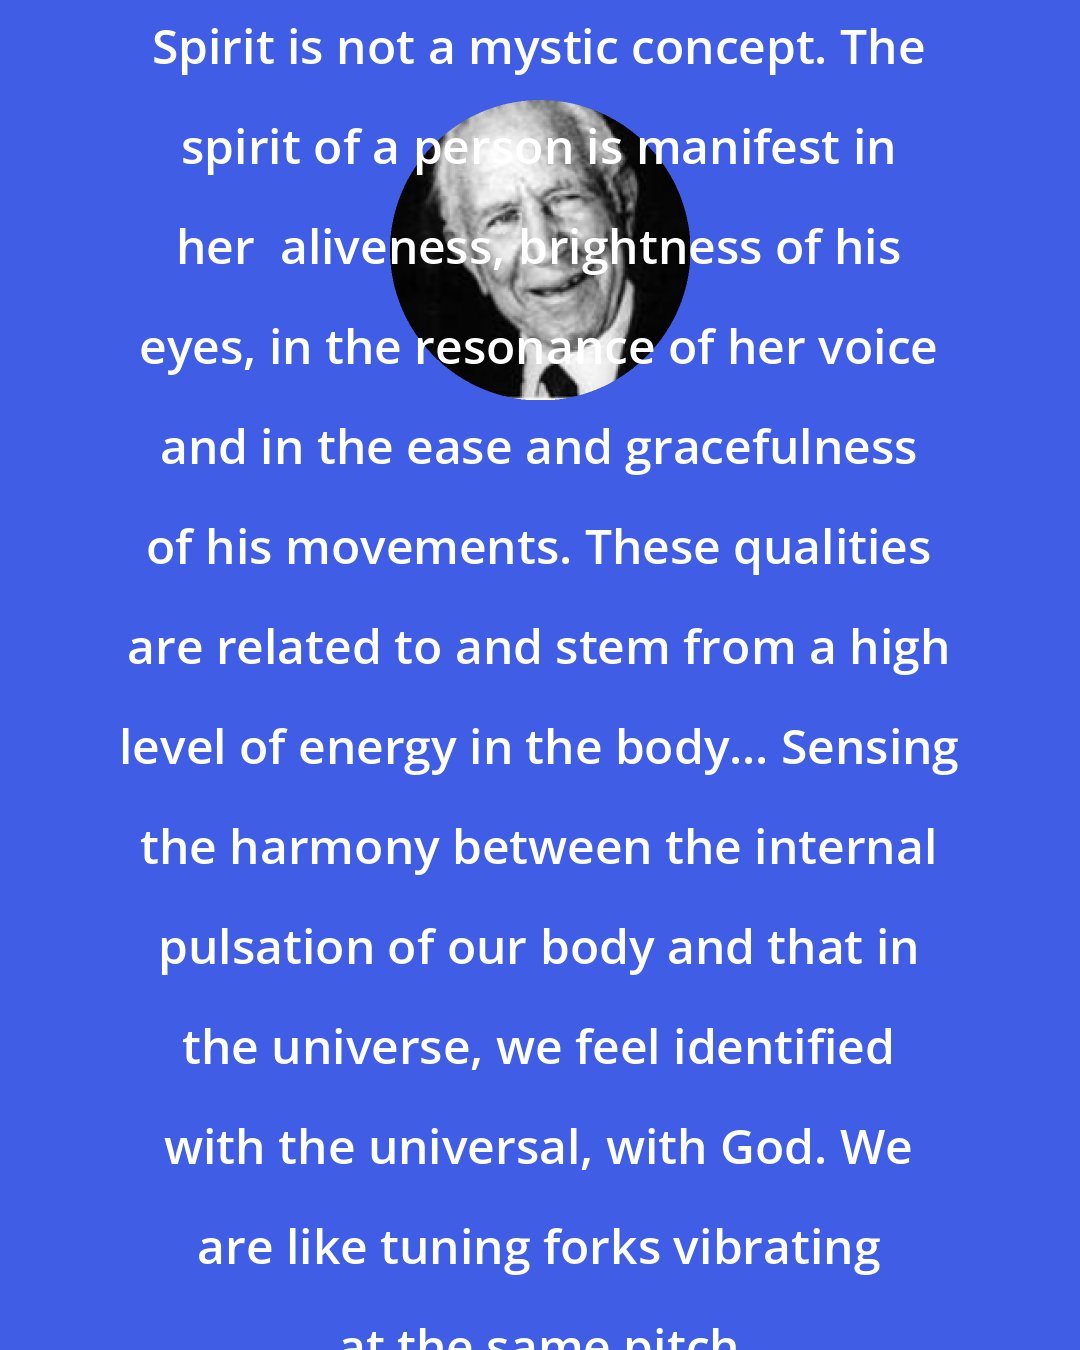 Alexander Lowen: Spirit is not a mystic concept. The spirit of a person is manifest in her  aliveness, brightness of his eyes, in the resonance of her voice and in the ease and gracefulness of his movements. These qualities are related to and stem from a high level of energy in the body... Sensing the harmony between the internal pulsation of our body and that in the universe, we feel identified with the universal, with God. We are like tuning forks vibrating at the same pitch